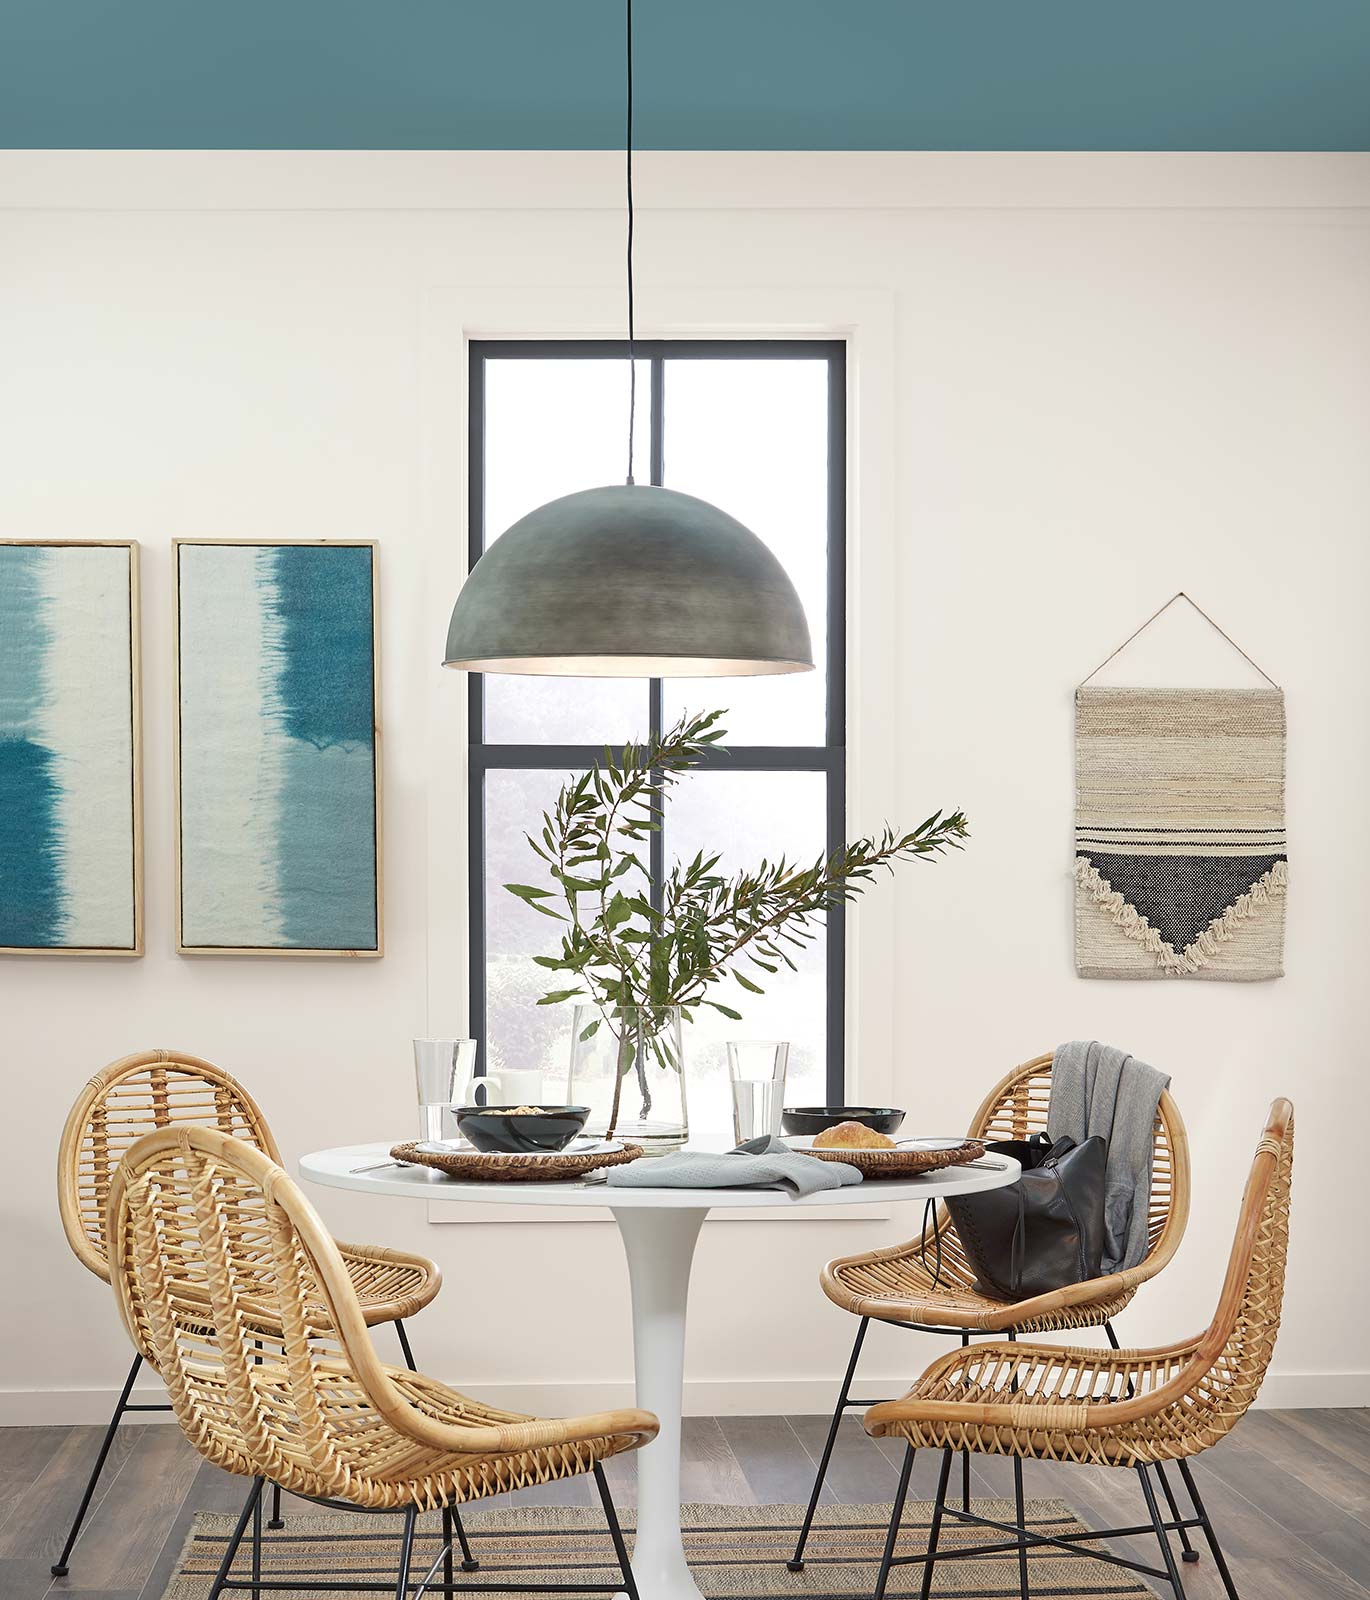 A casual dining area with a small round table and four rattan chairs surrounding it. Wall is painted in white with a blue painted ceiling. The atmosphere is relaxed and calm.